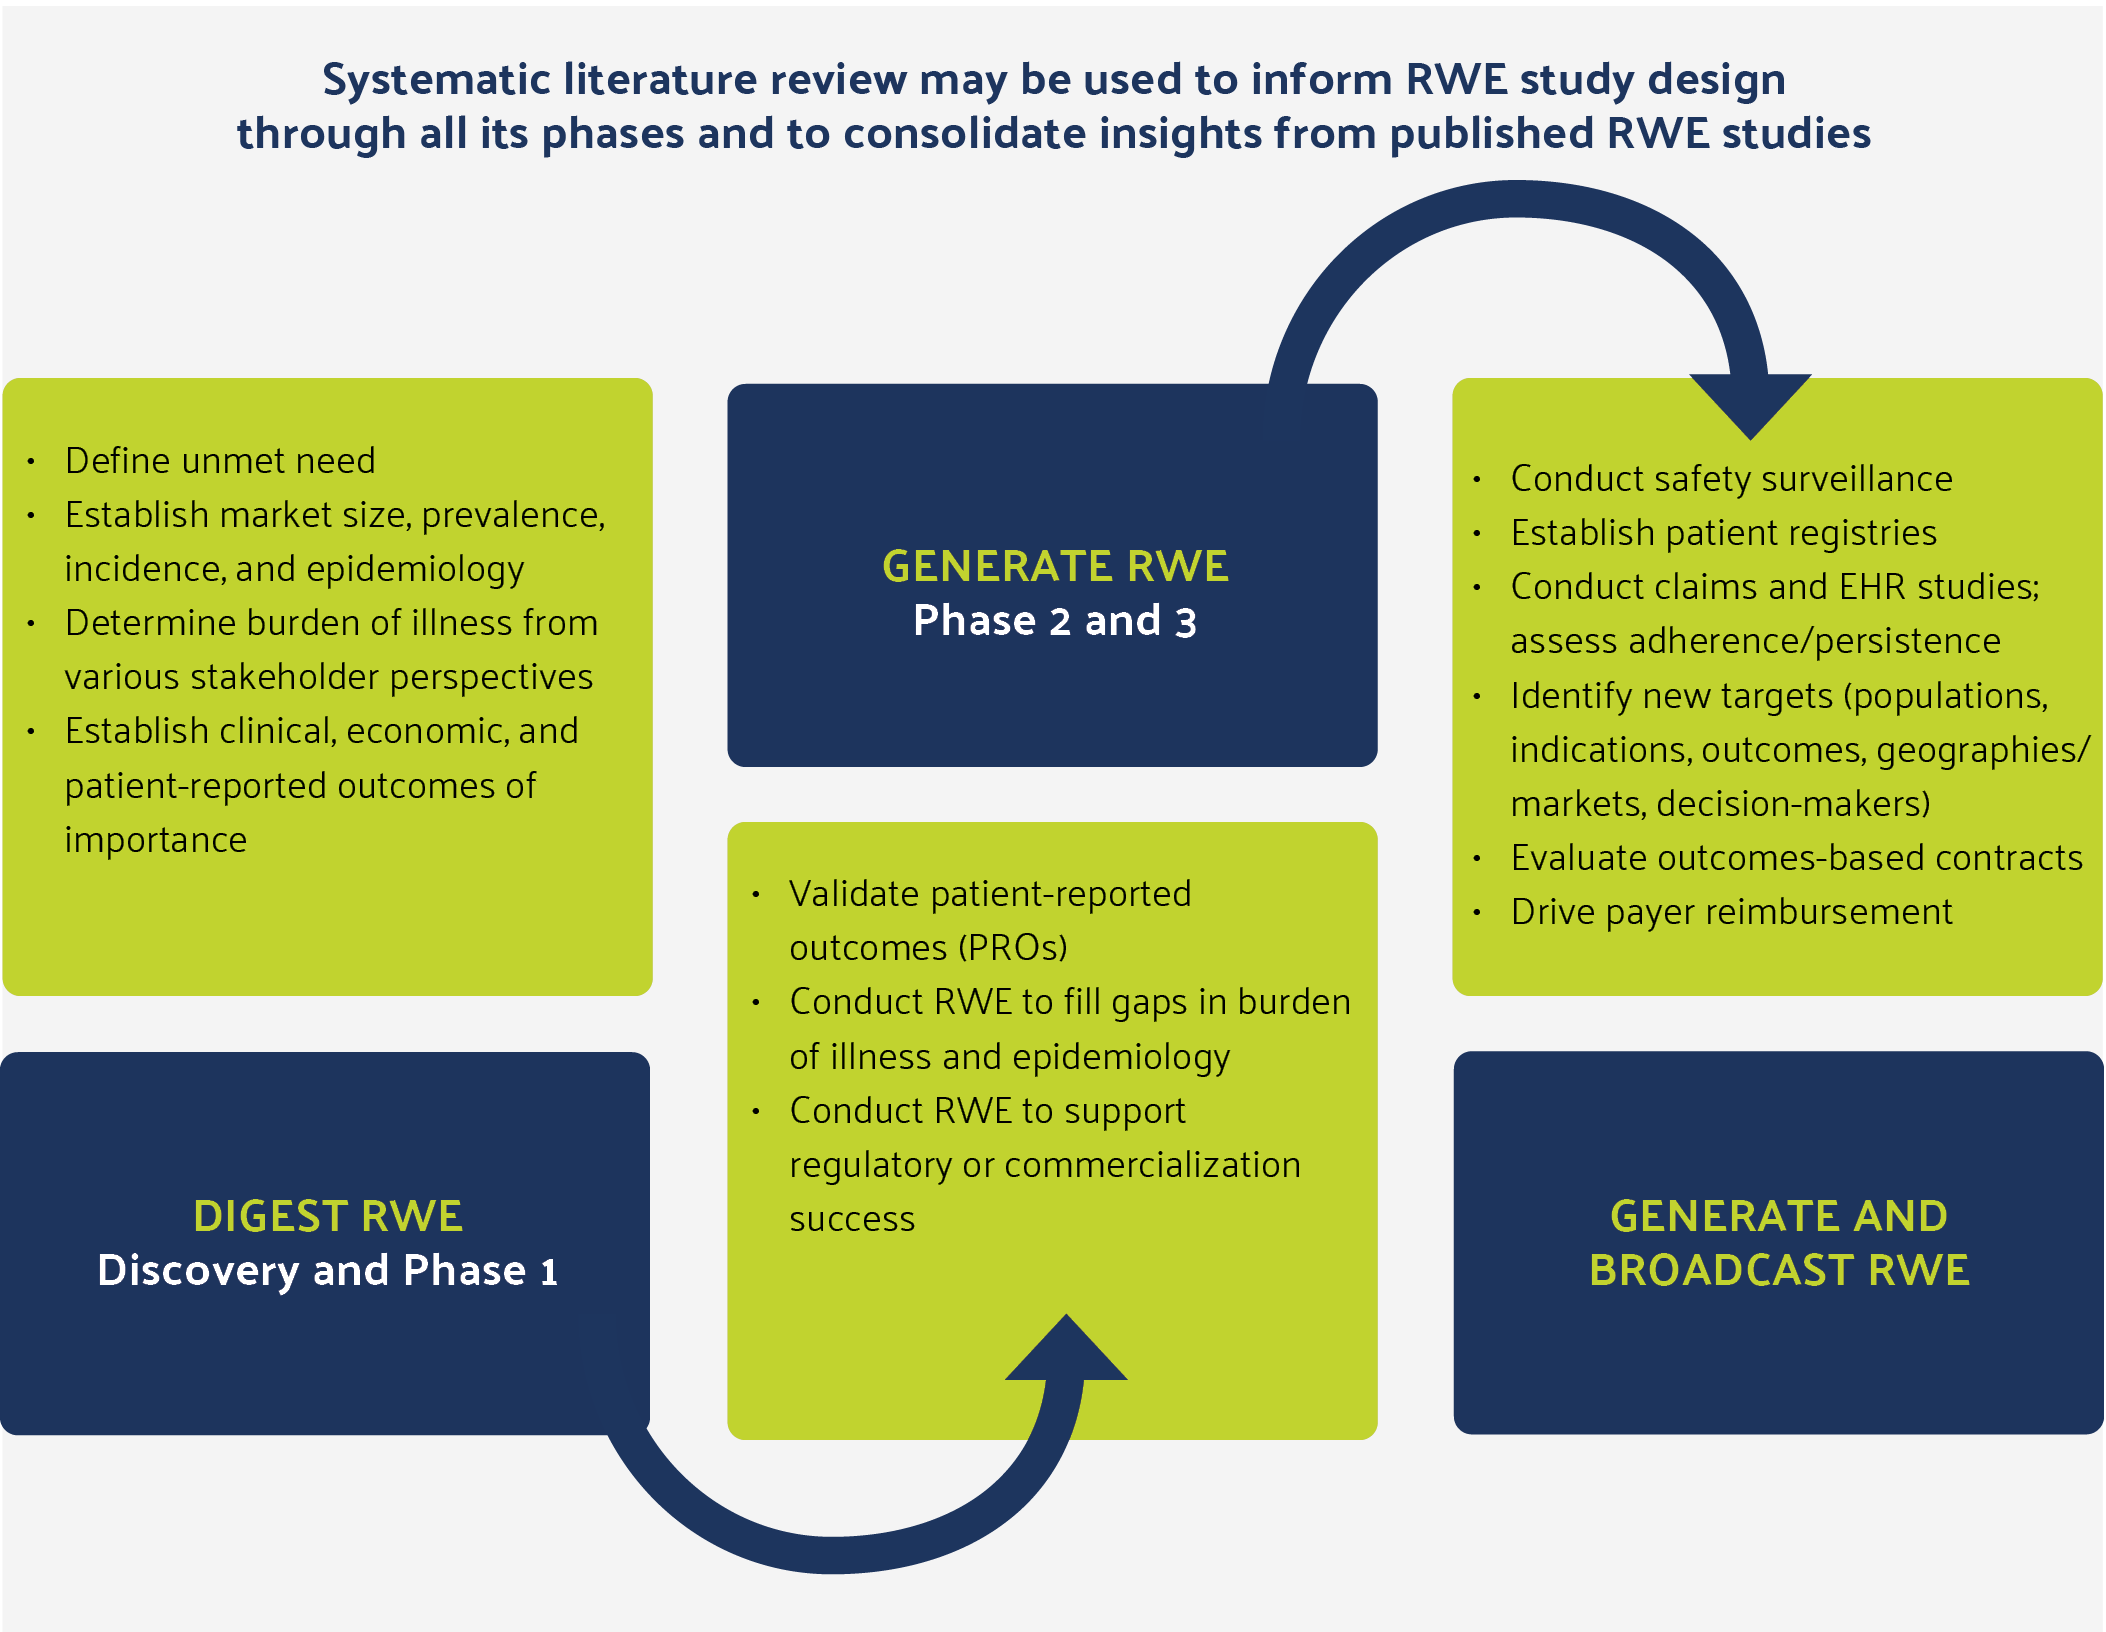 Systematic literature review may be used to inform RWE study design through all its phases and to consolidate insights from published RWE studies